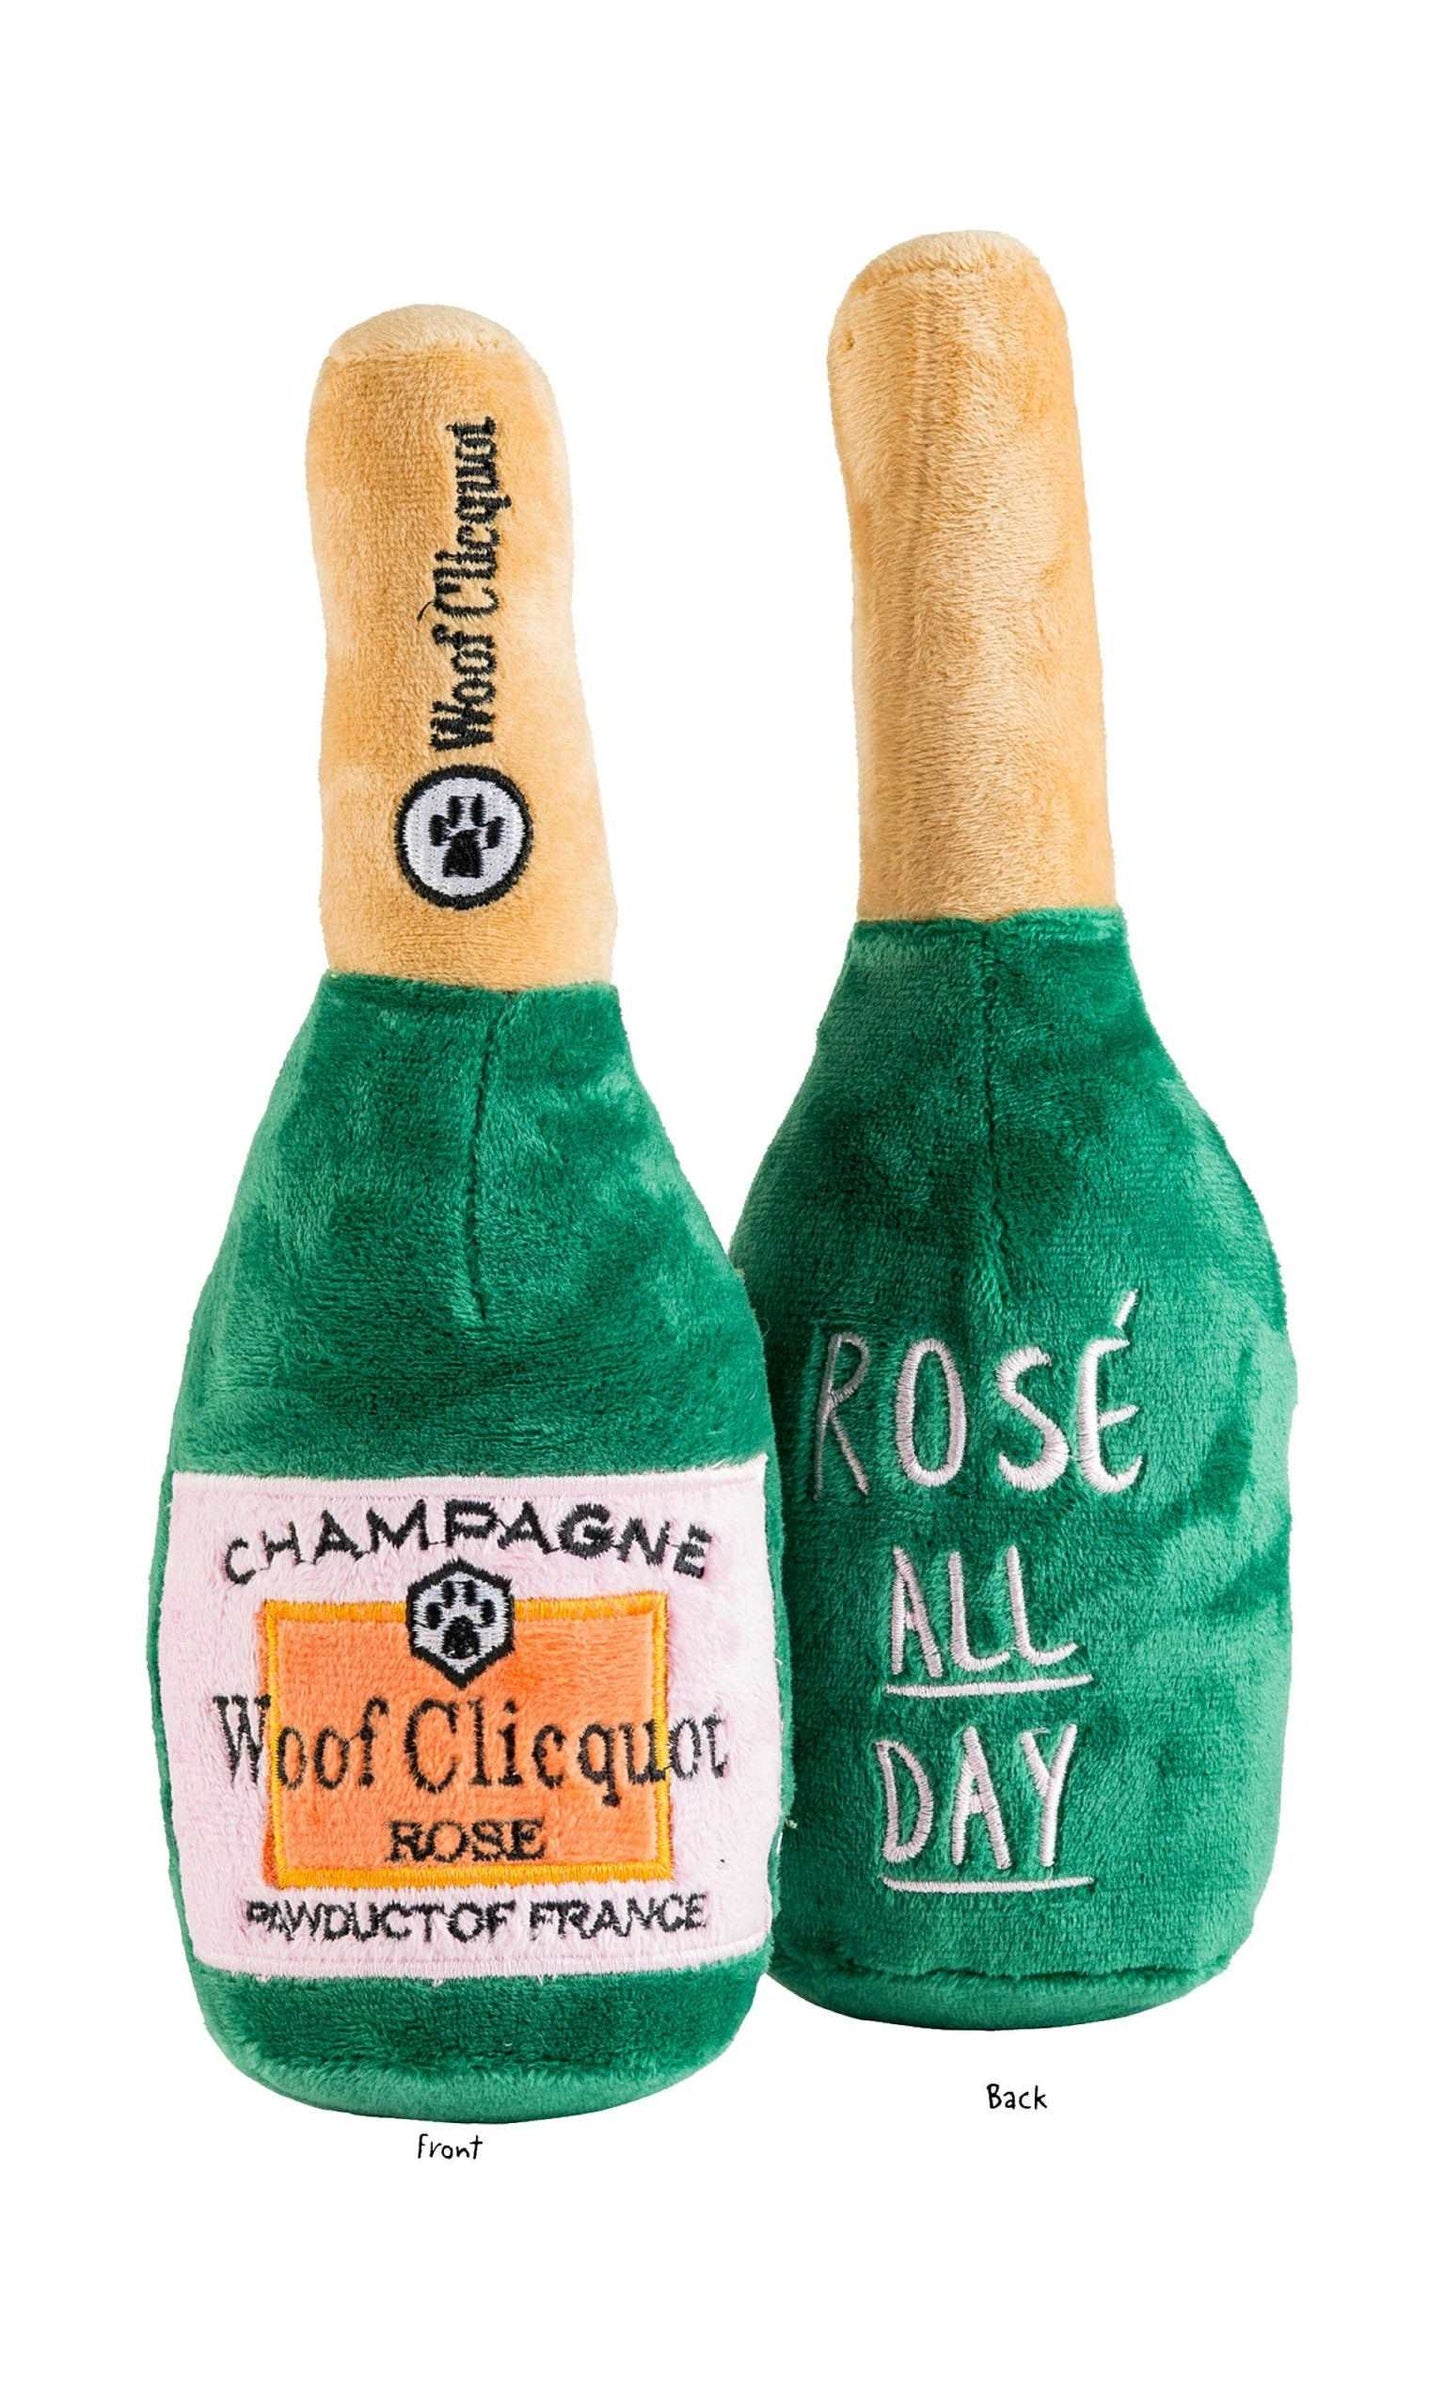 Woof Clicquot Rose Dog Toy